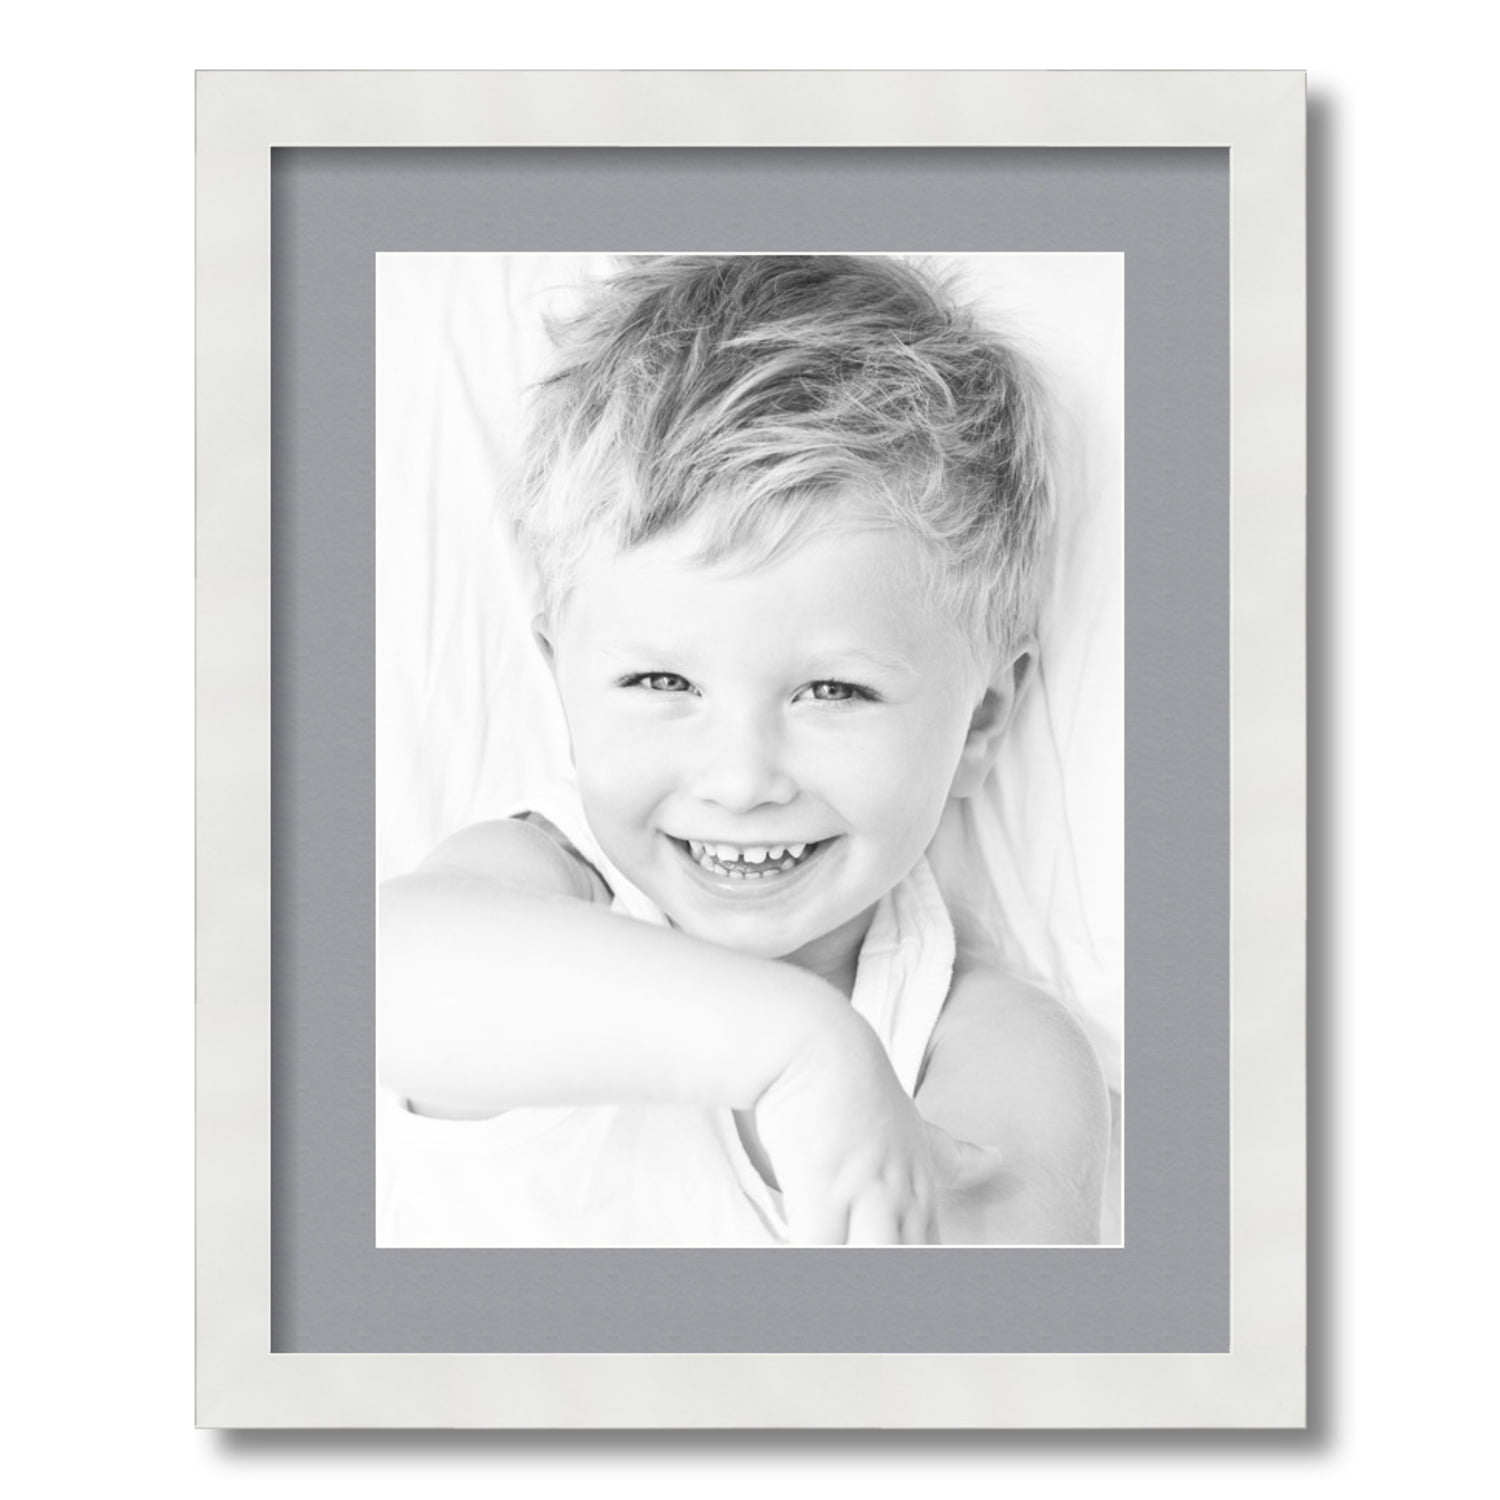 12x16 Opening ArtToFrames Matted 16x20 Black Picture Frame with 2" Double Mat 